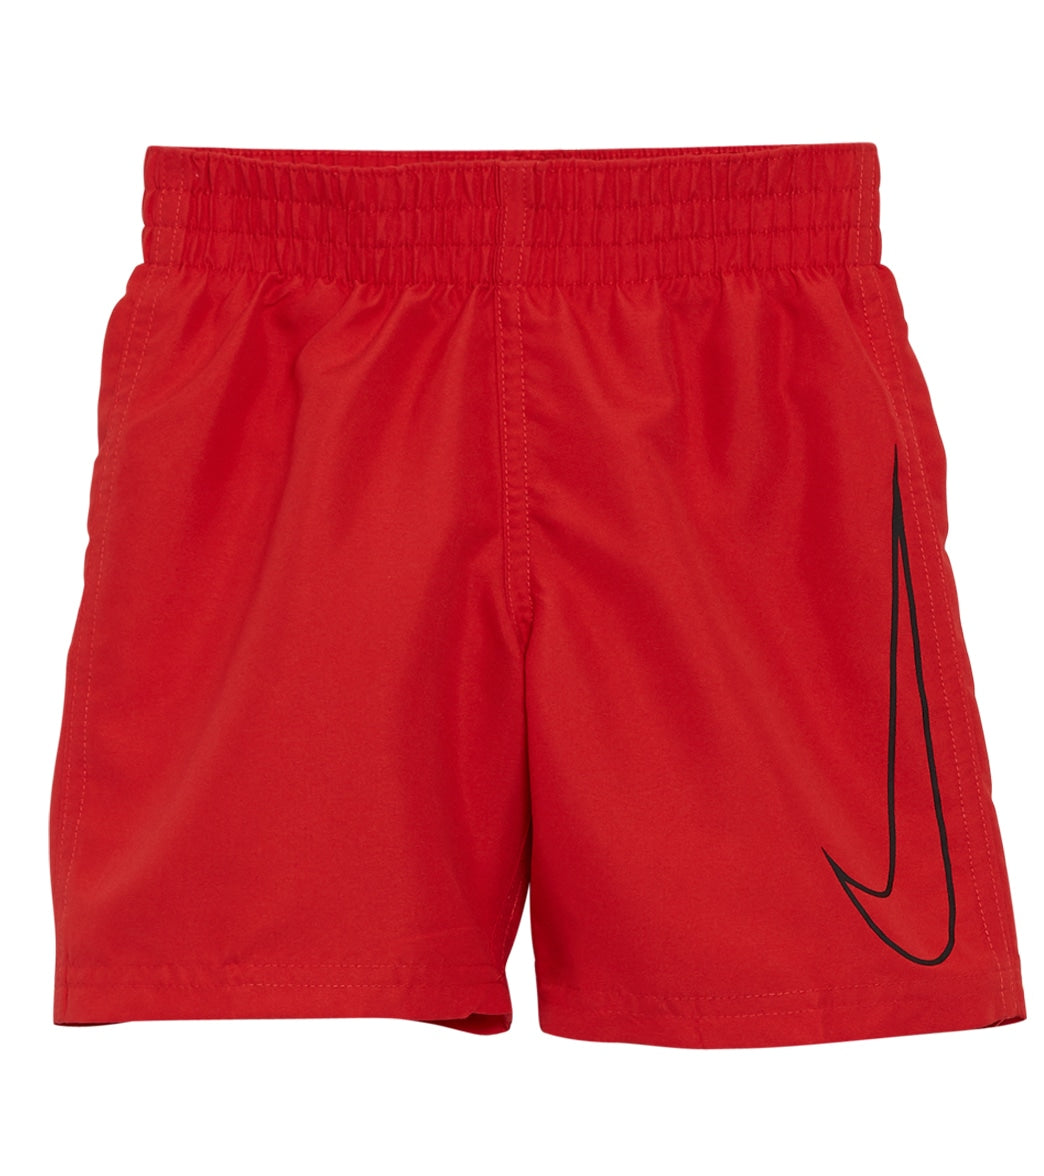 Nike Boys' Swoosh Solid 6 Volley Short - University Red Medium Polyester - Swimoutlet.com